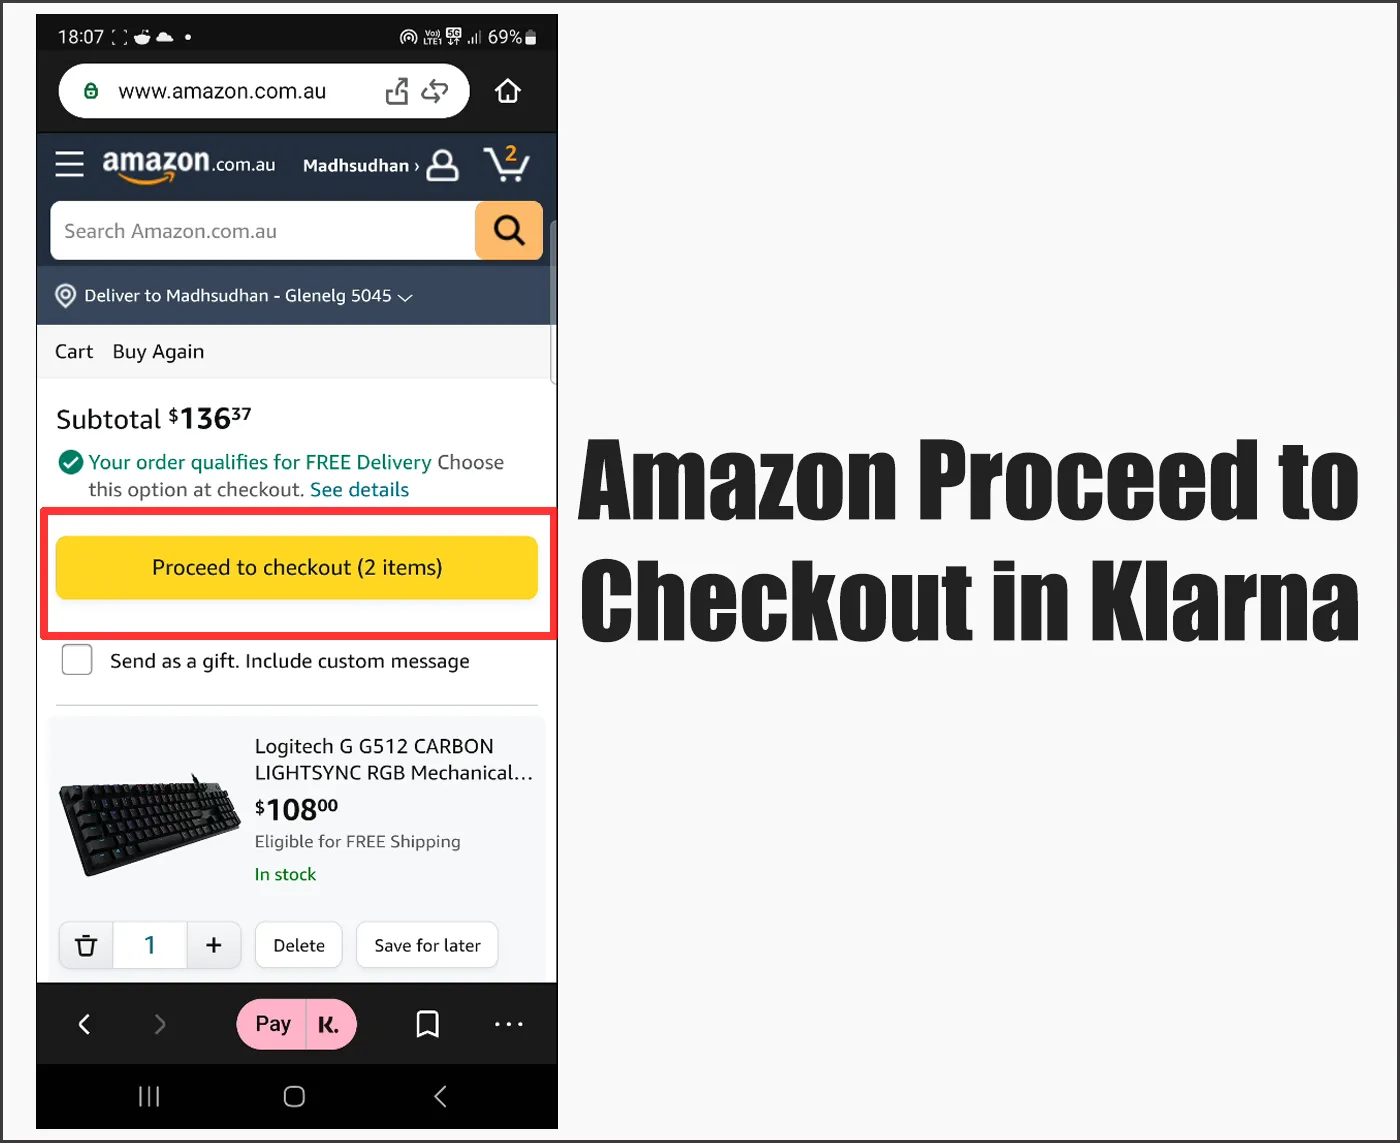 Amazon Proceed to Checkout in Klarna